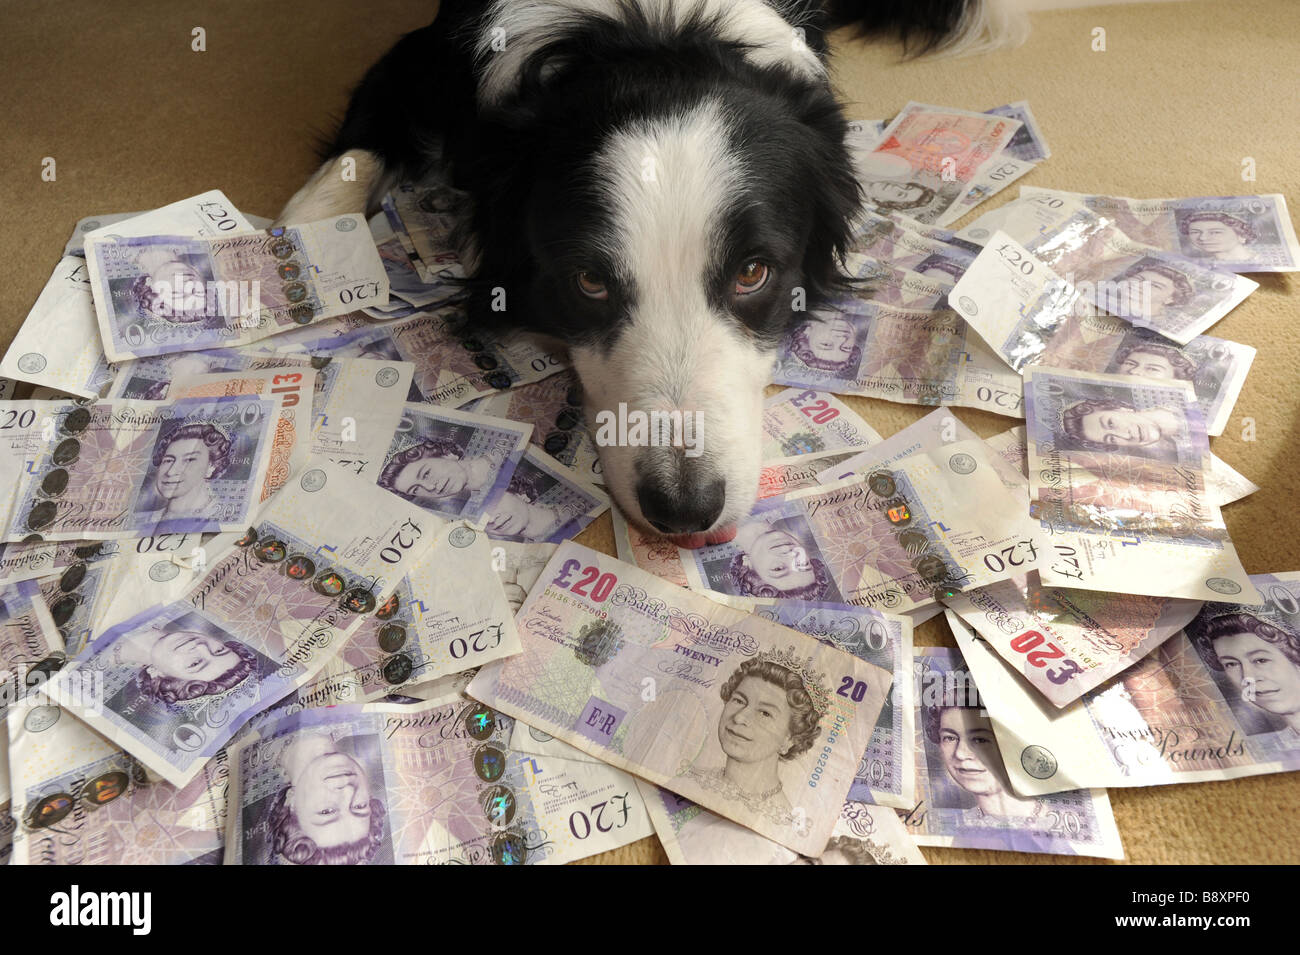 Pet dog and loads of cash Stock Photo